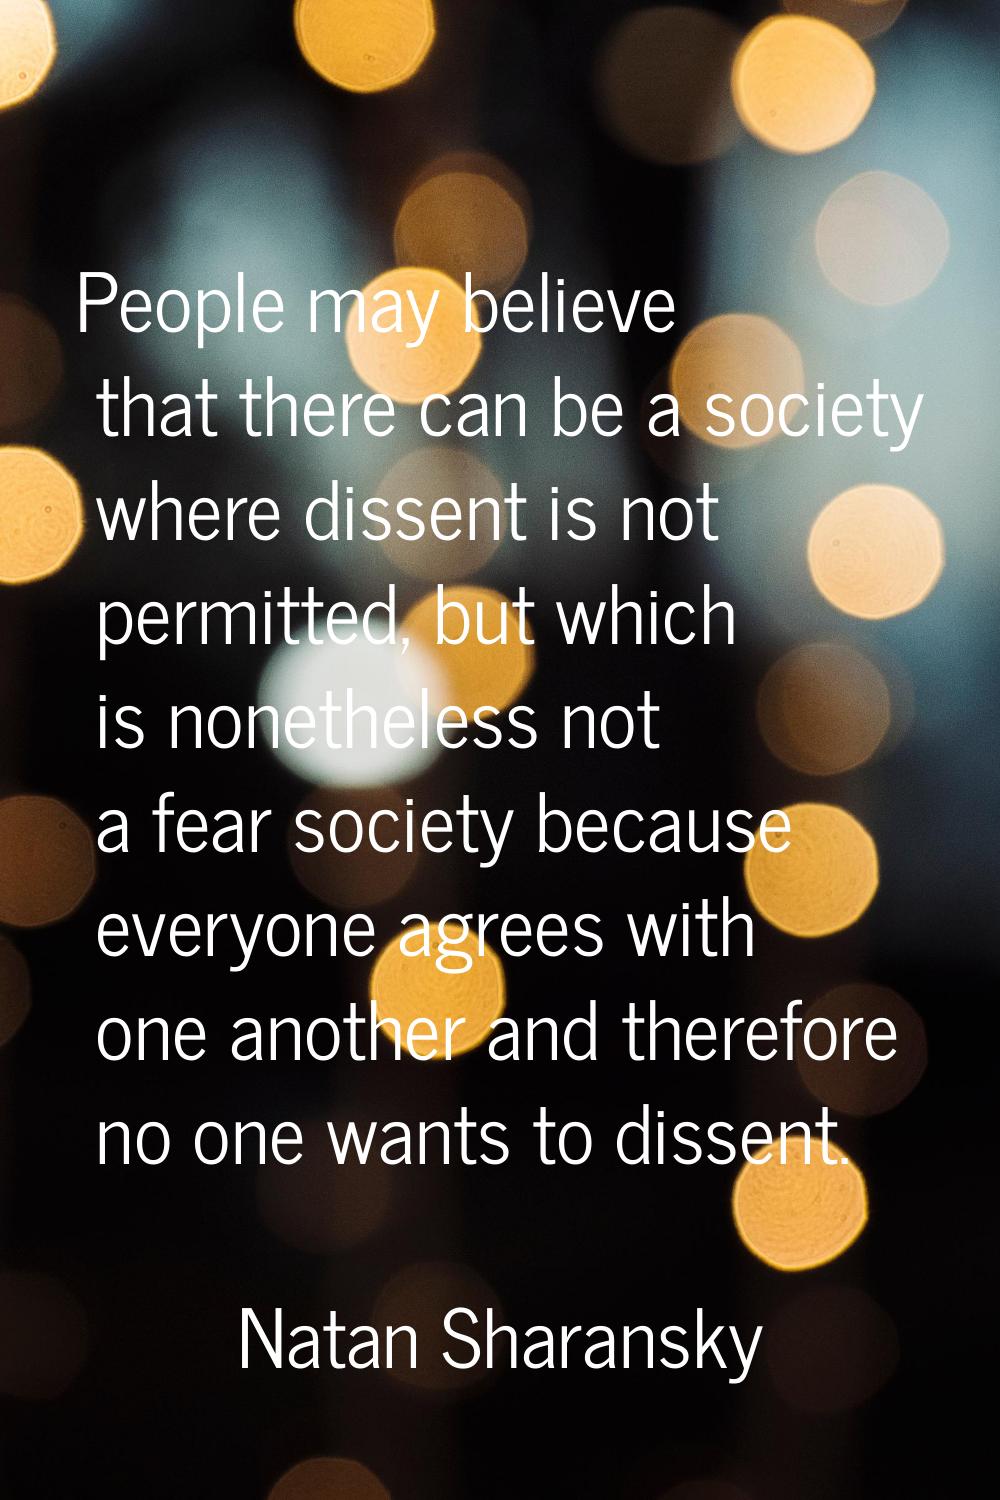 People may believe that there can be a society where dissent is not permitted, but which is nonethe